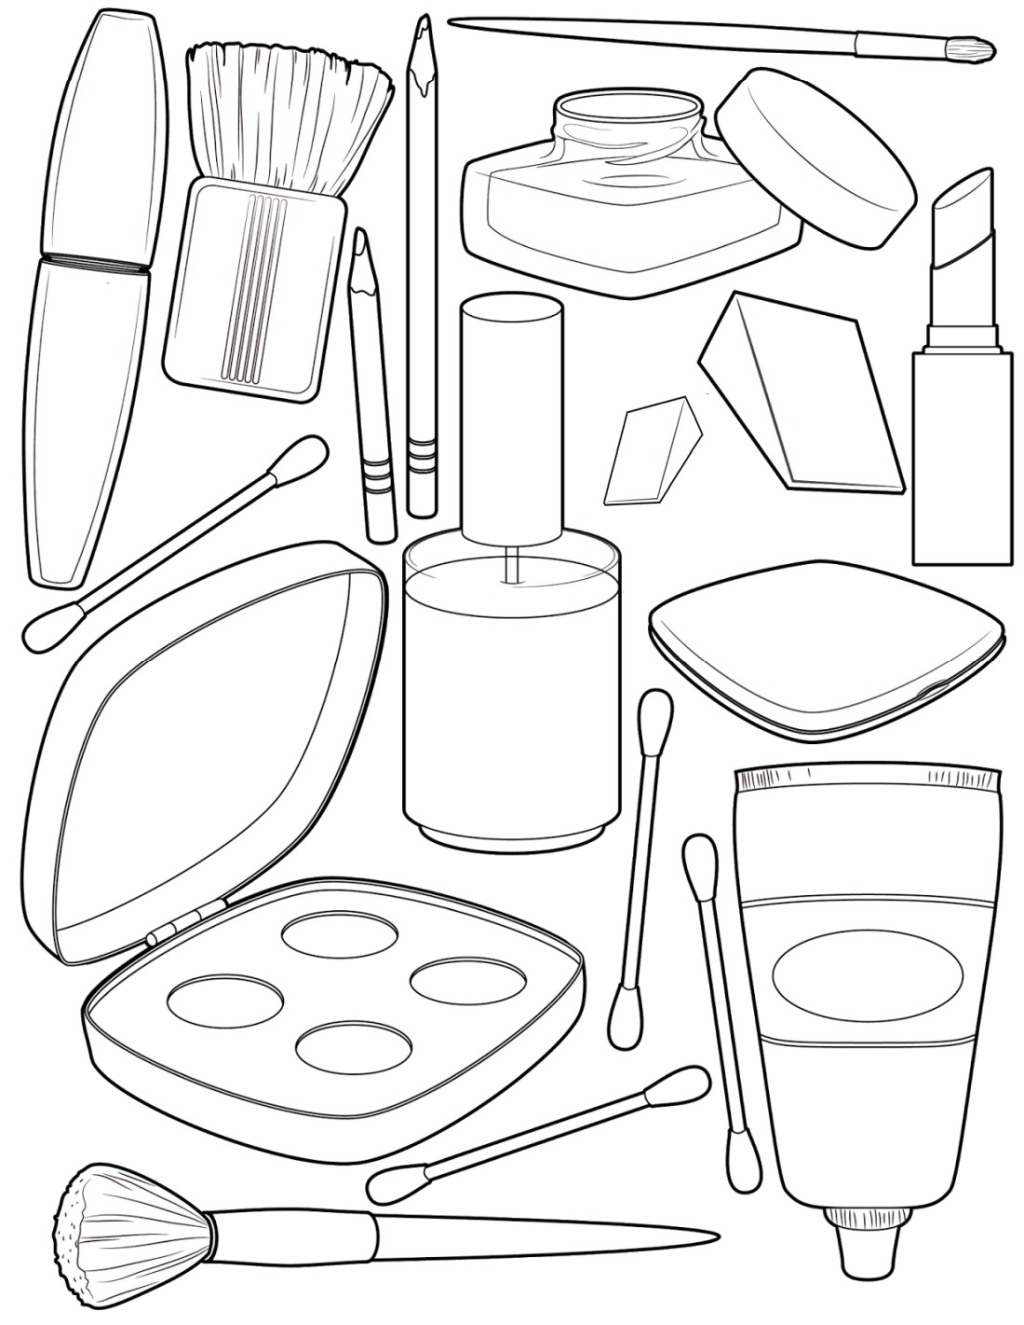 Face beauty tools for coloring